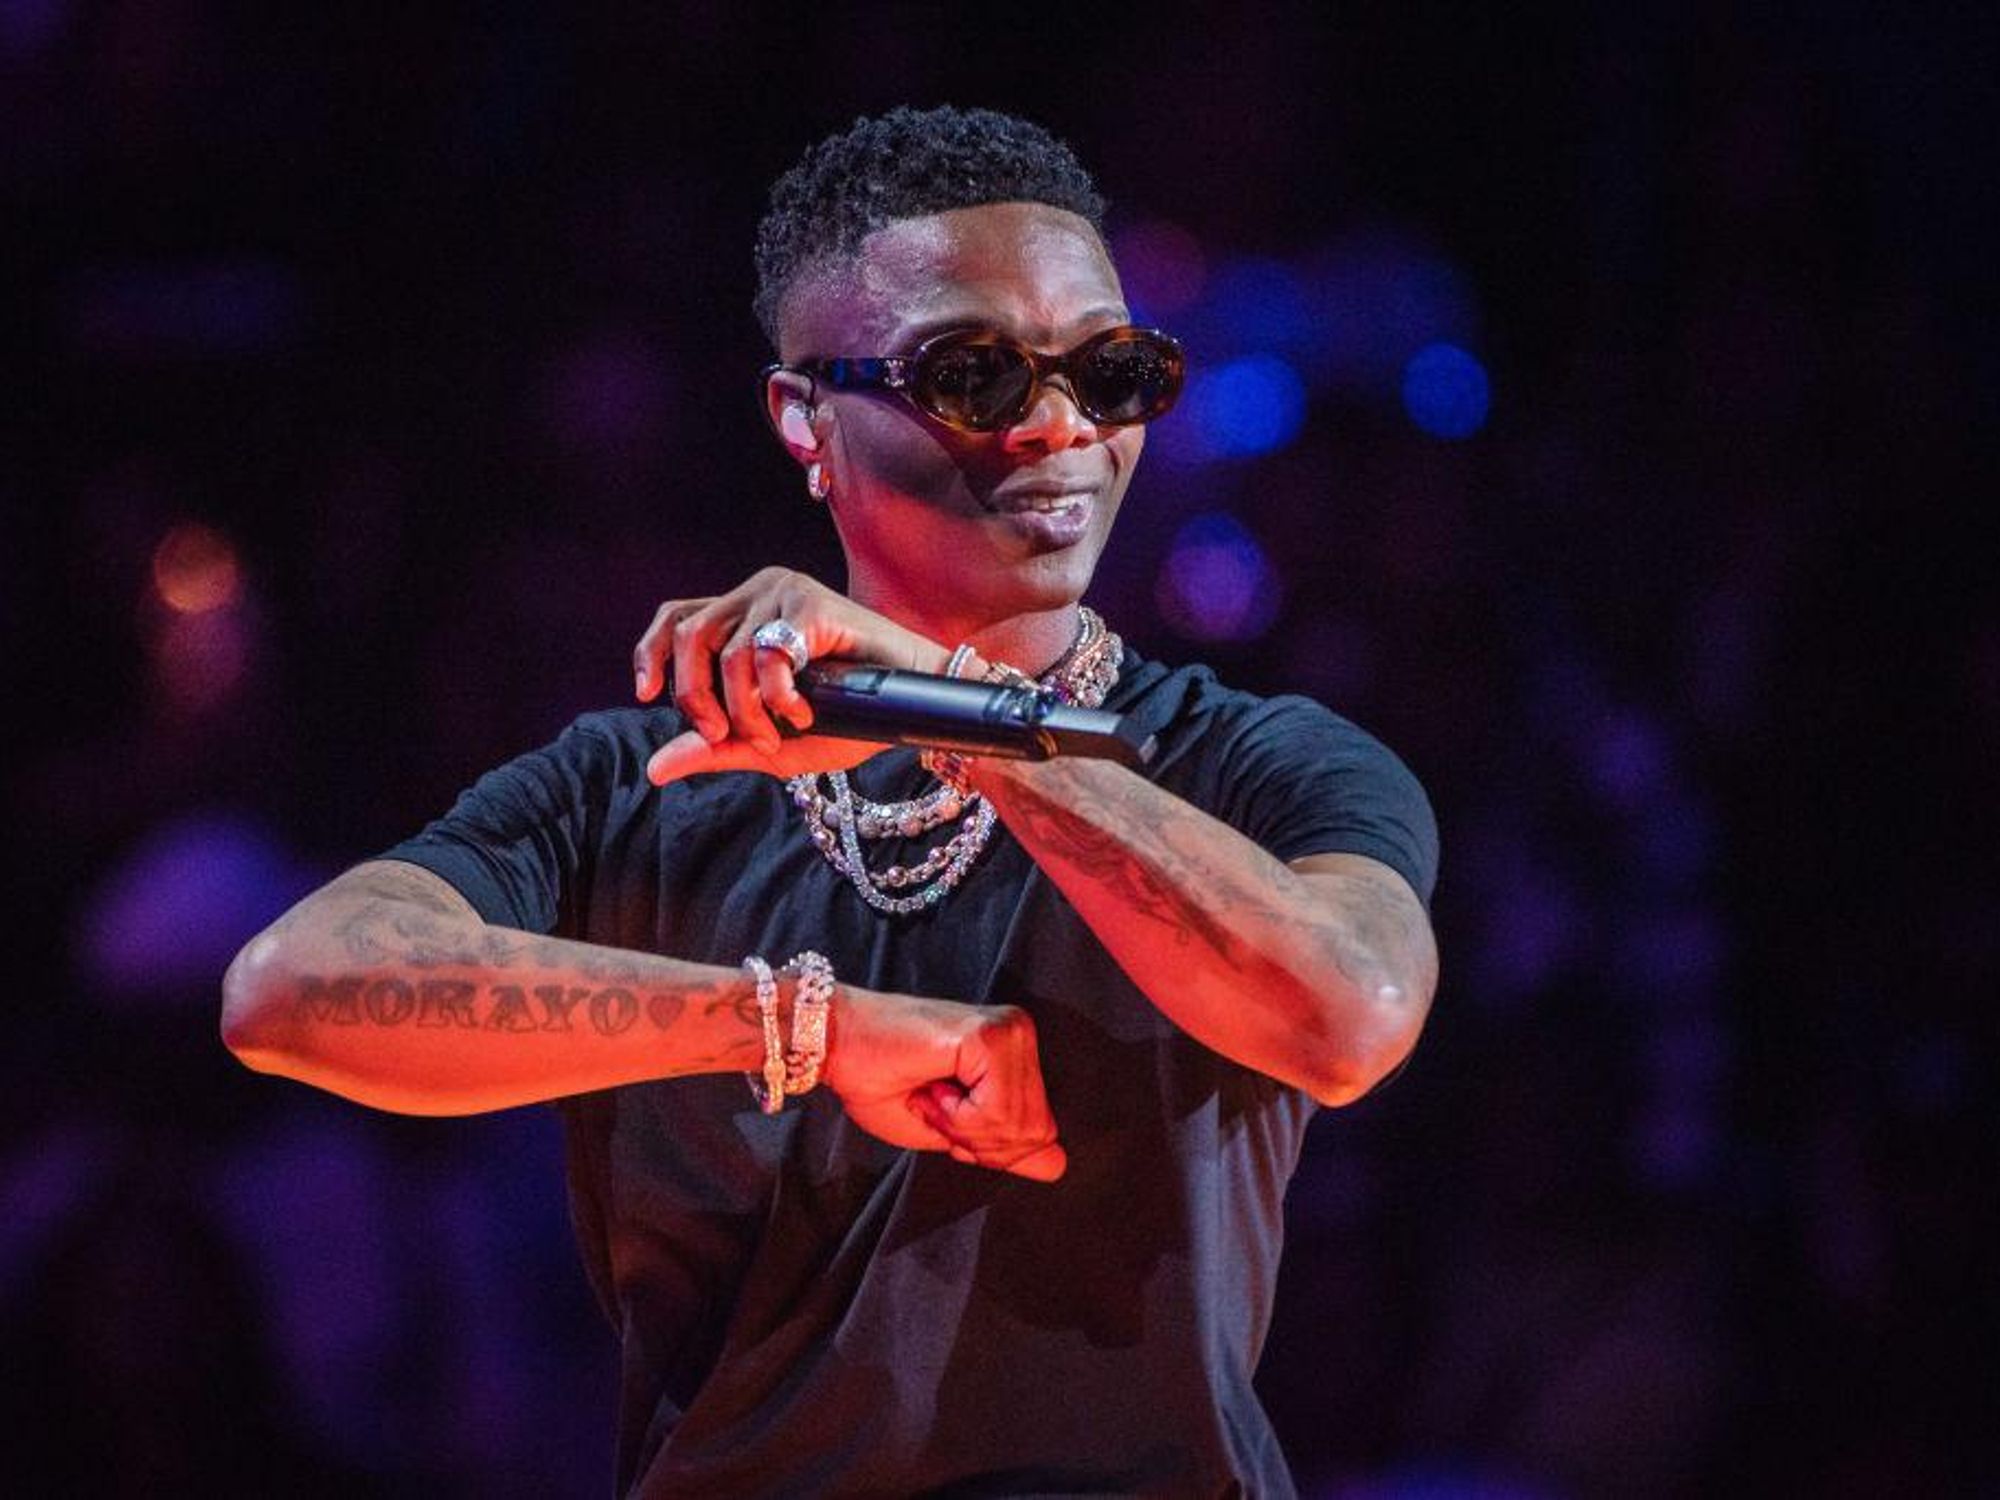 <div>Watch Wizkid's Historic Performance at London's O2 Arena</div>